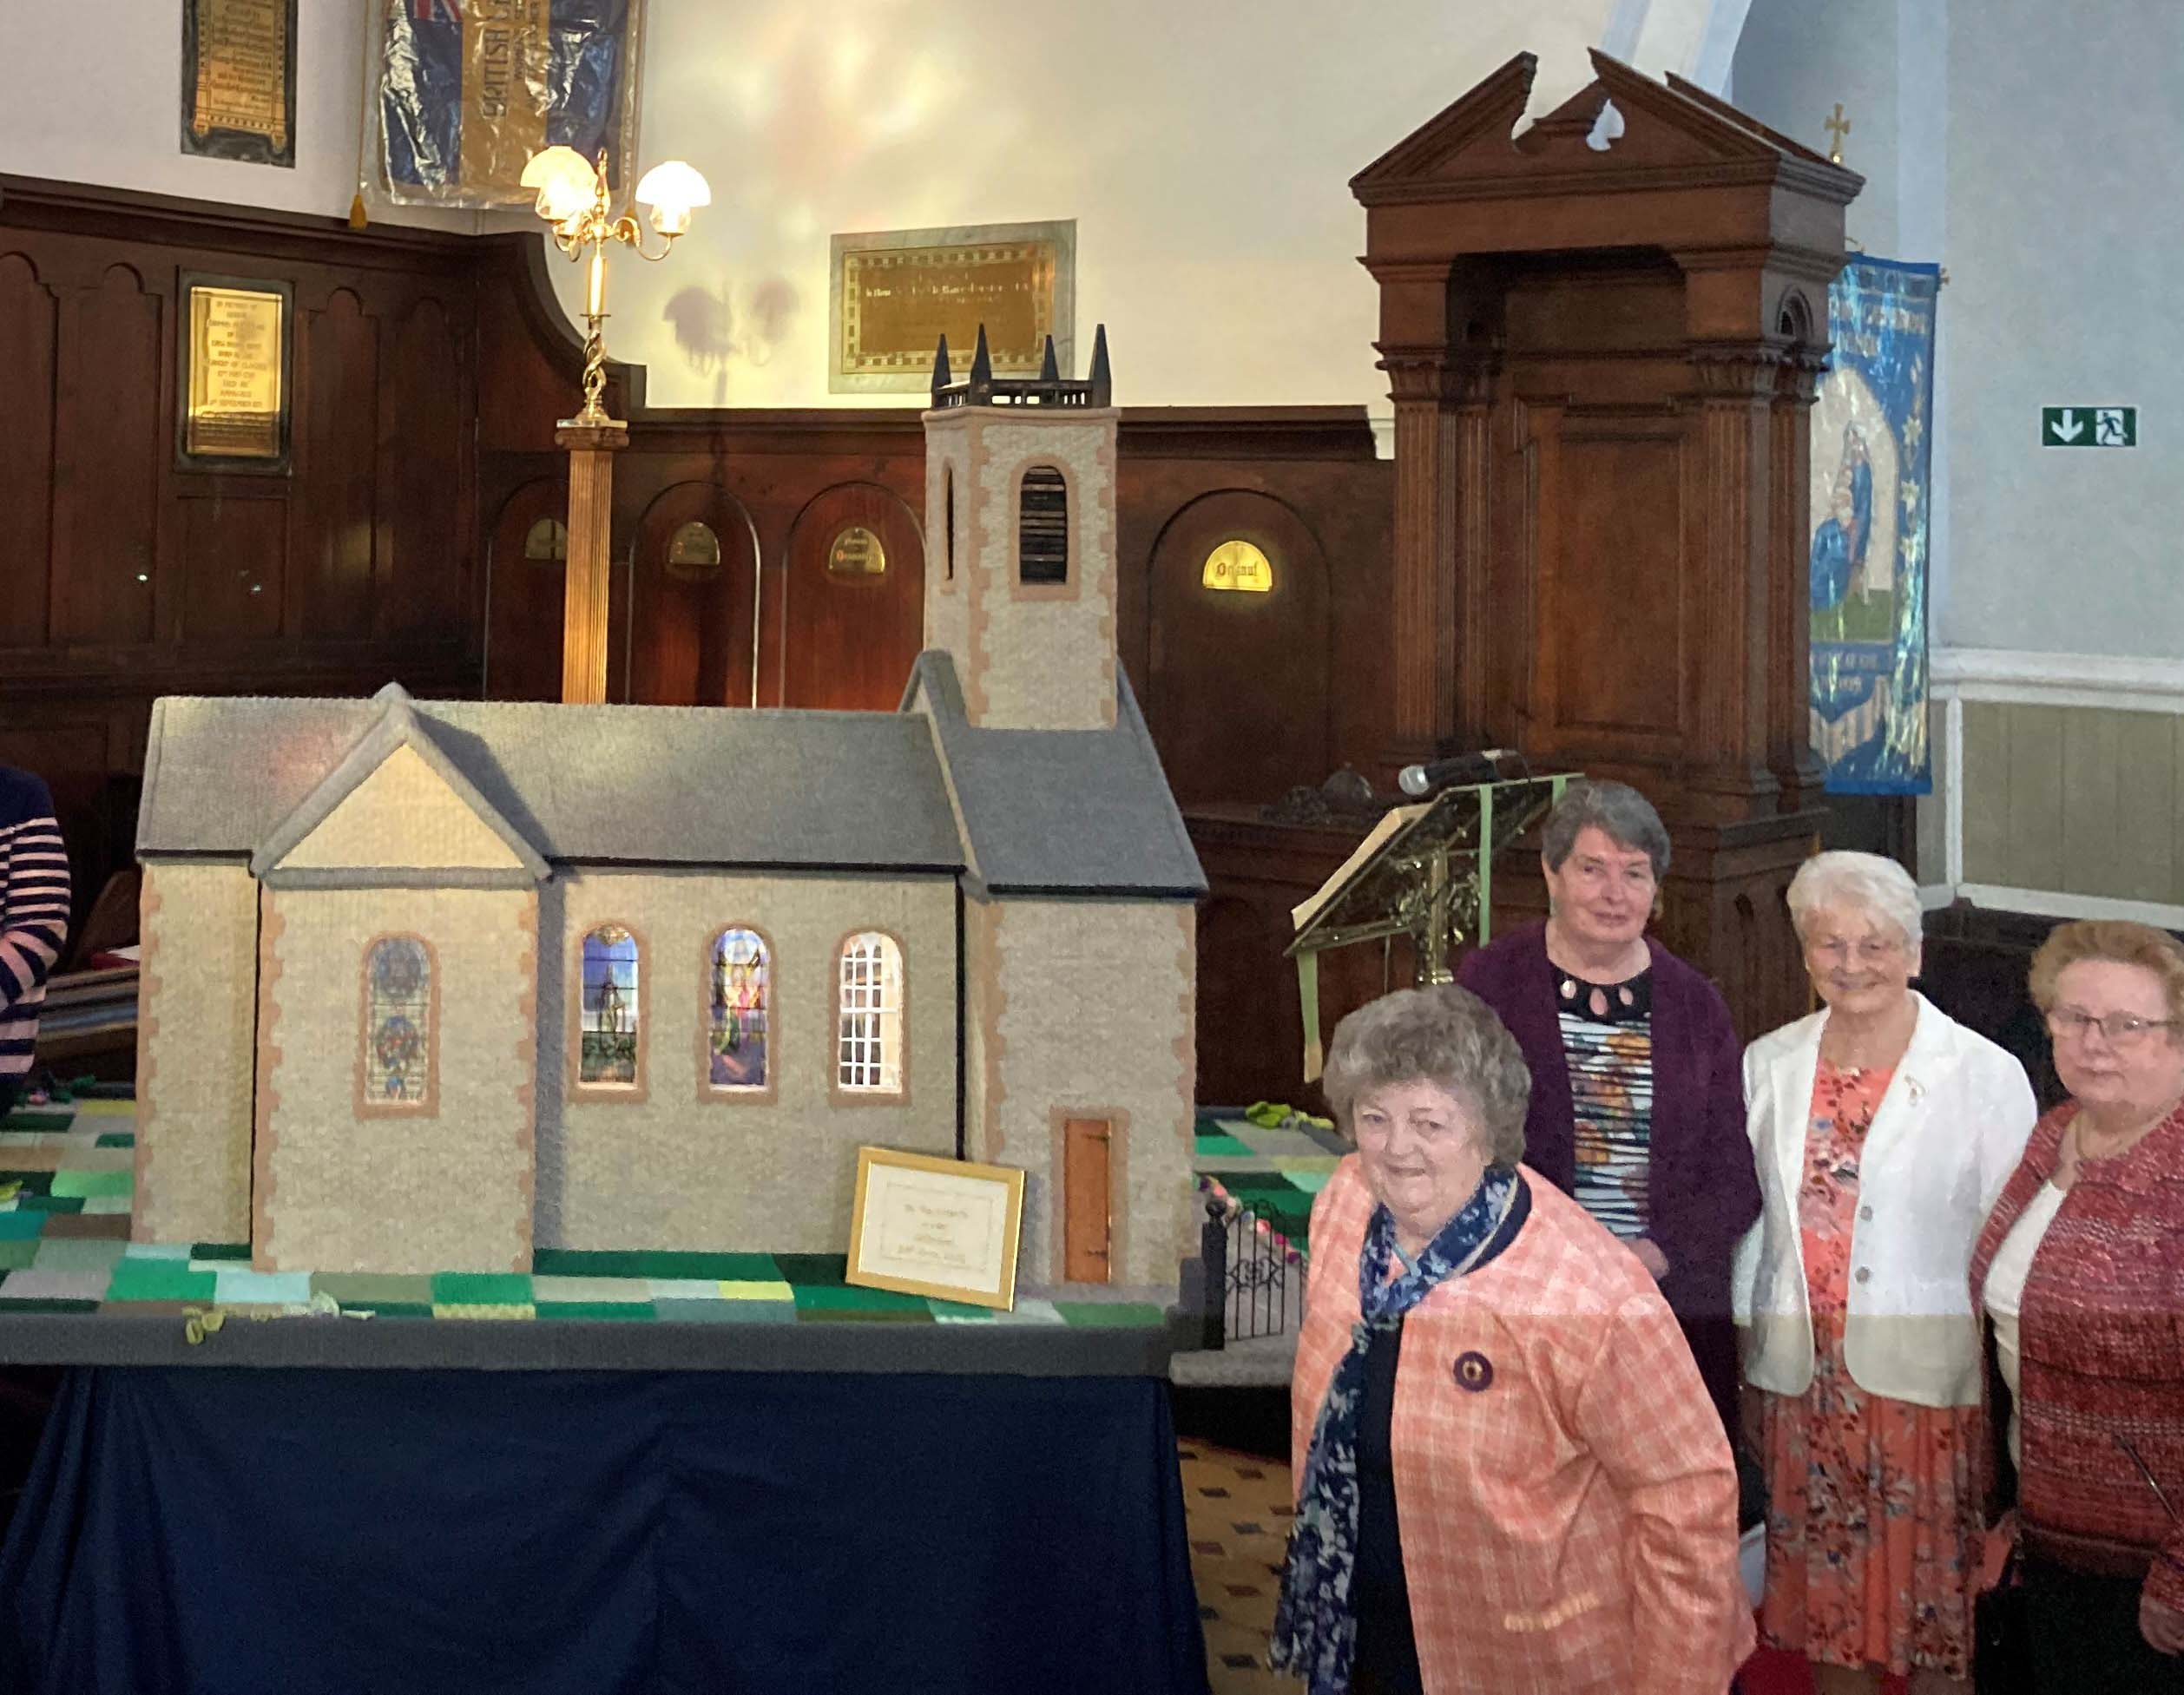 Members of the Knit Stitch and Natter Group with their model Cathedral.